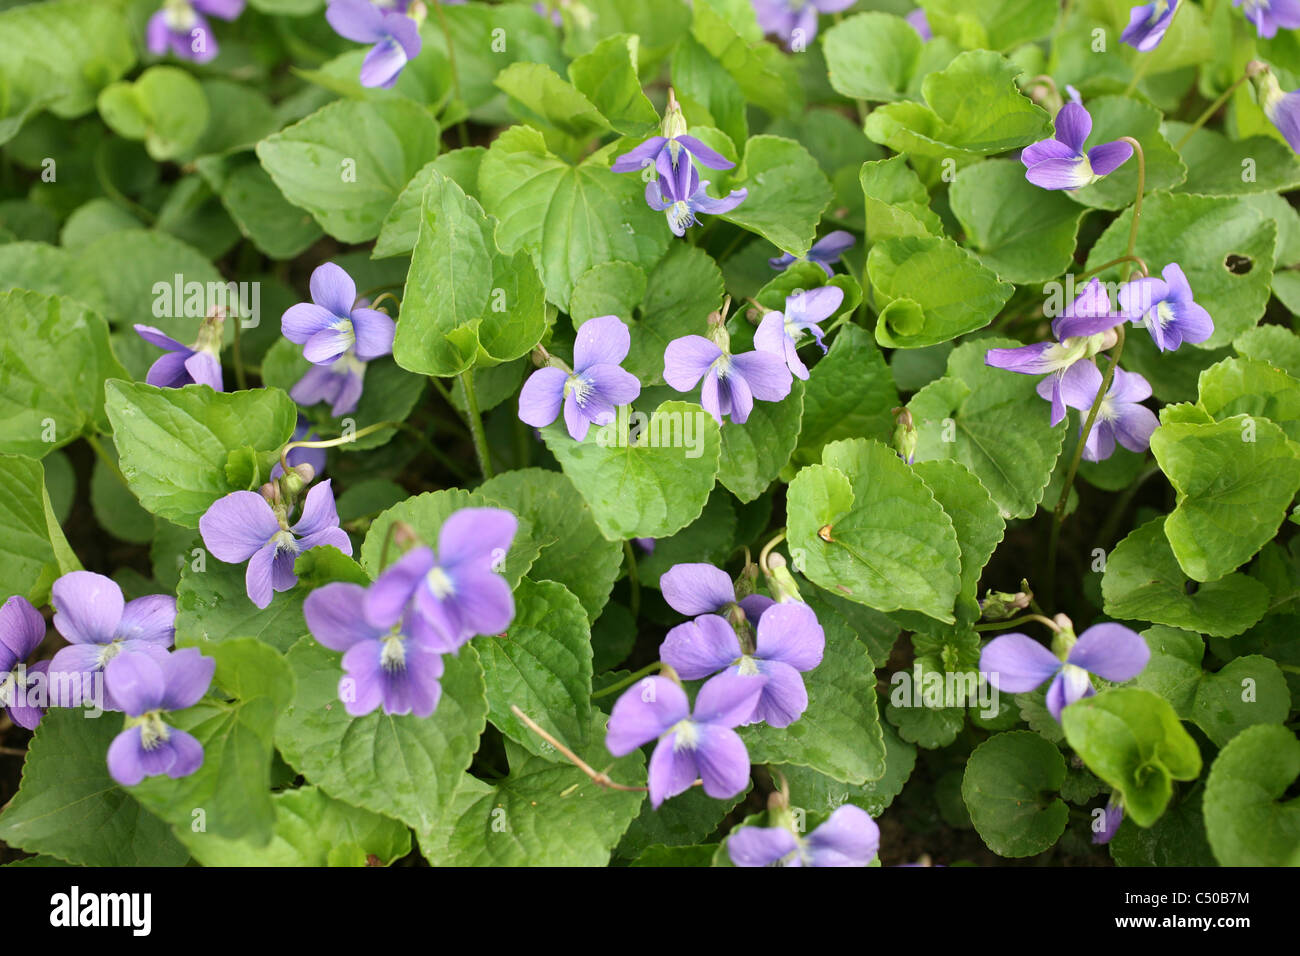 A group of wild violets grow in a shady woods. Stock Photo